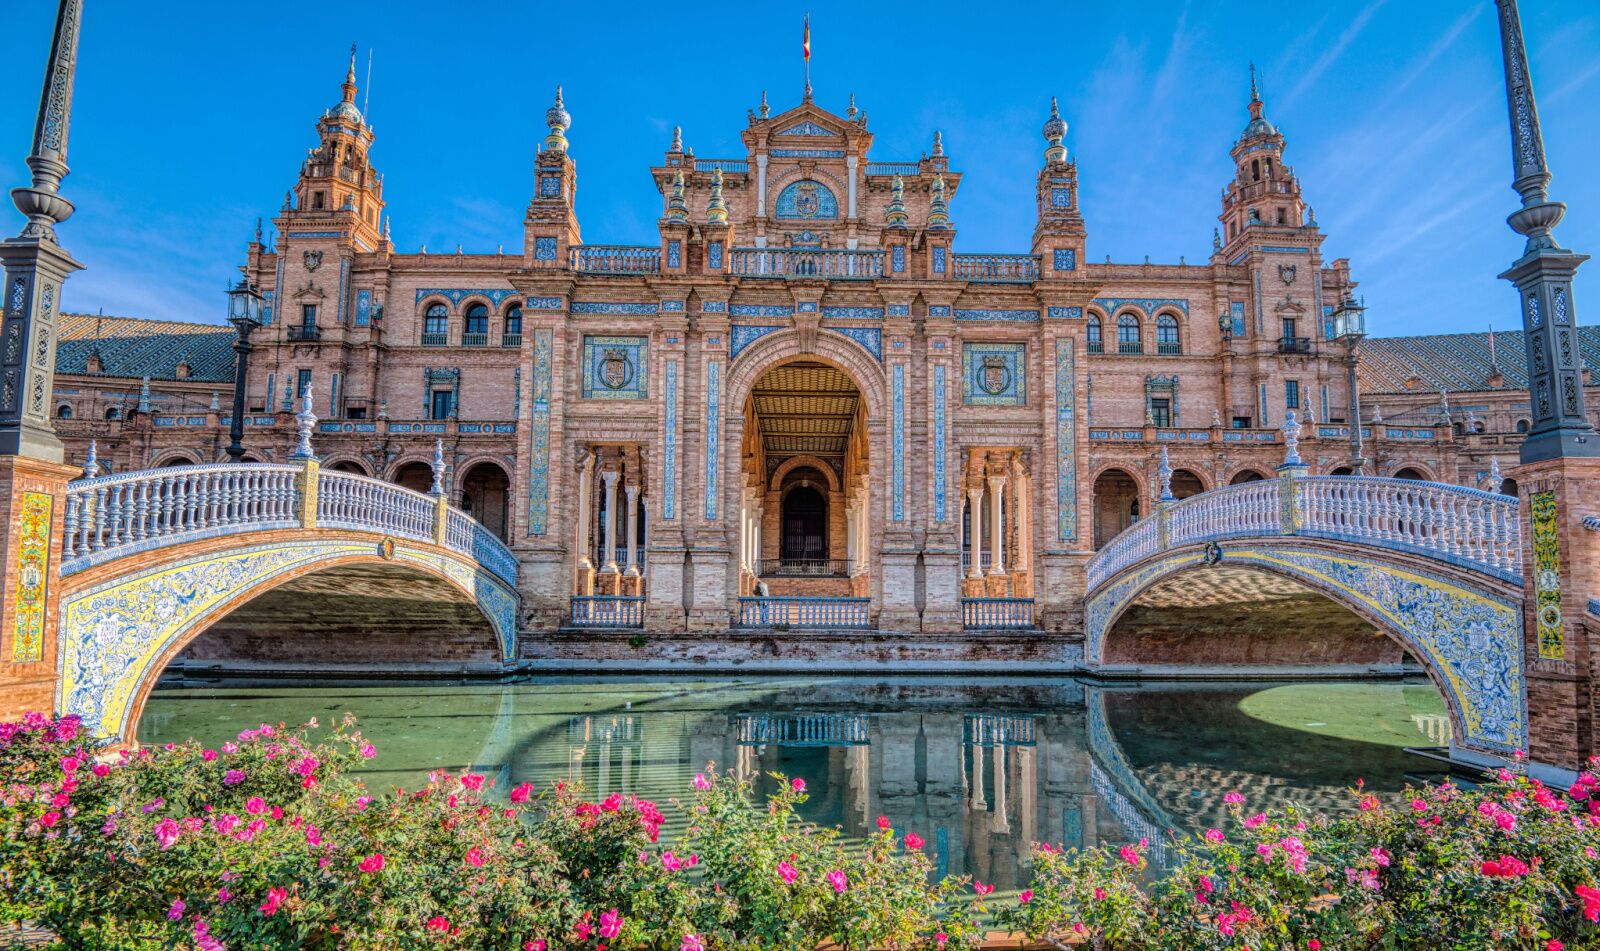 The plaza of Spain, one of the most famous sights in Seville 